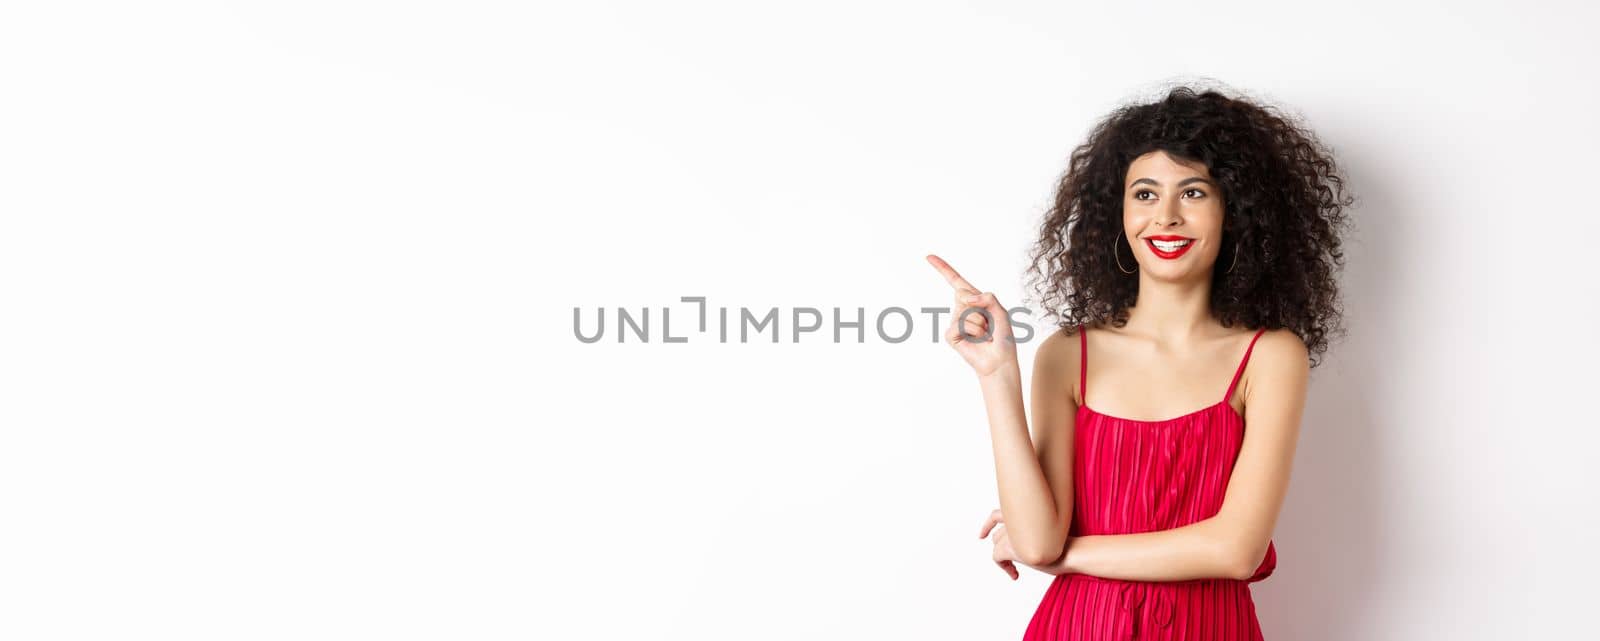 Elegant girl in red dress and evening makeup, pointing finger left and looking at logo, smiling satisfied, standing on white background.